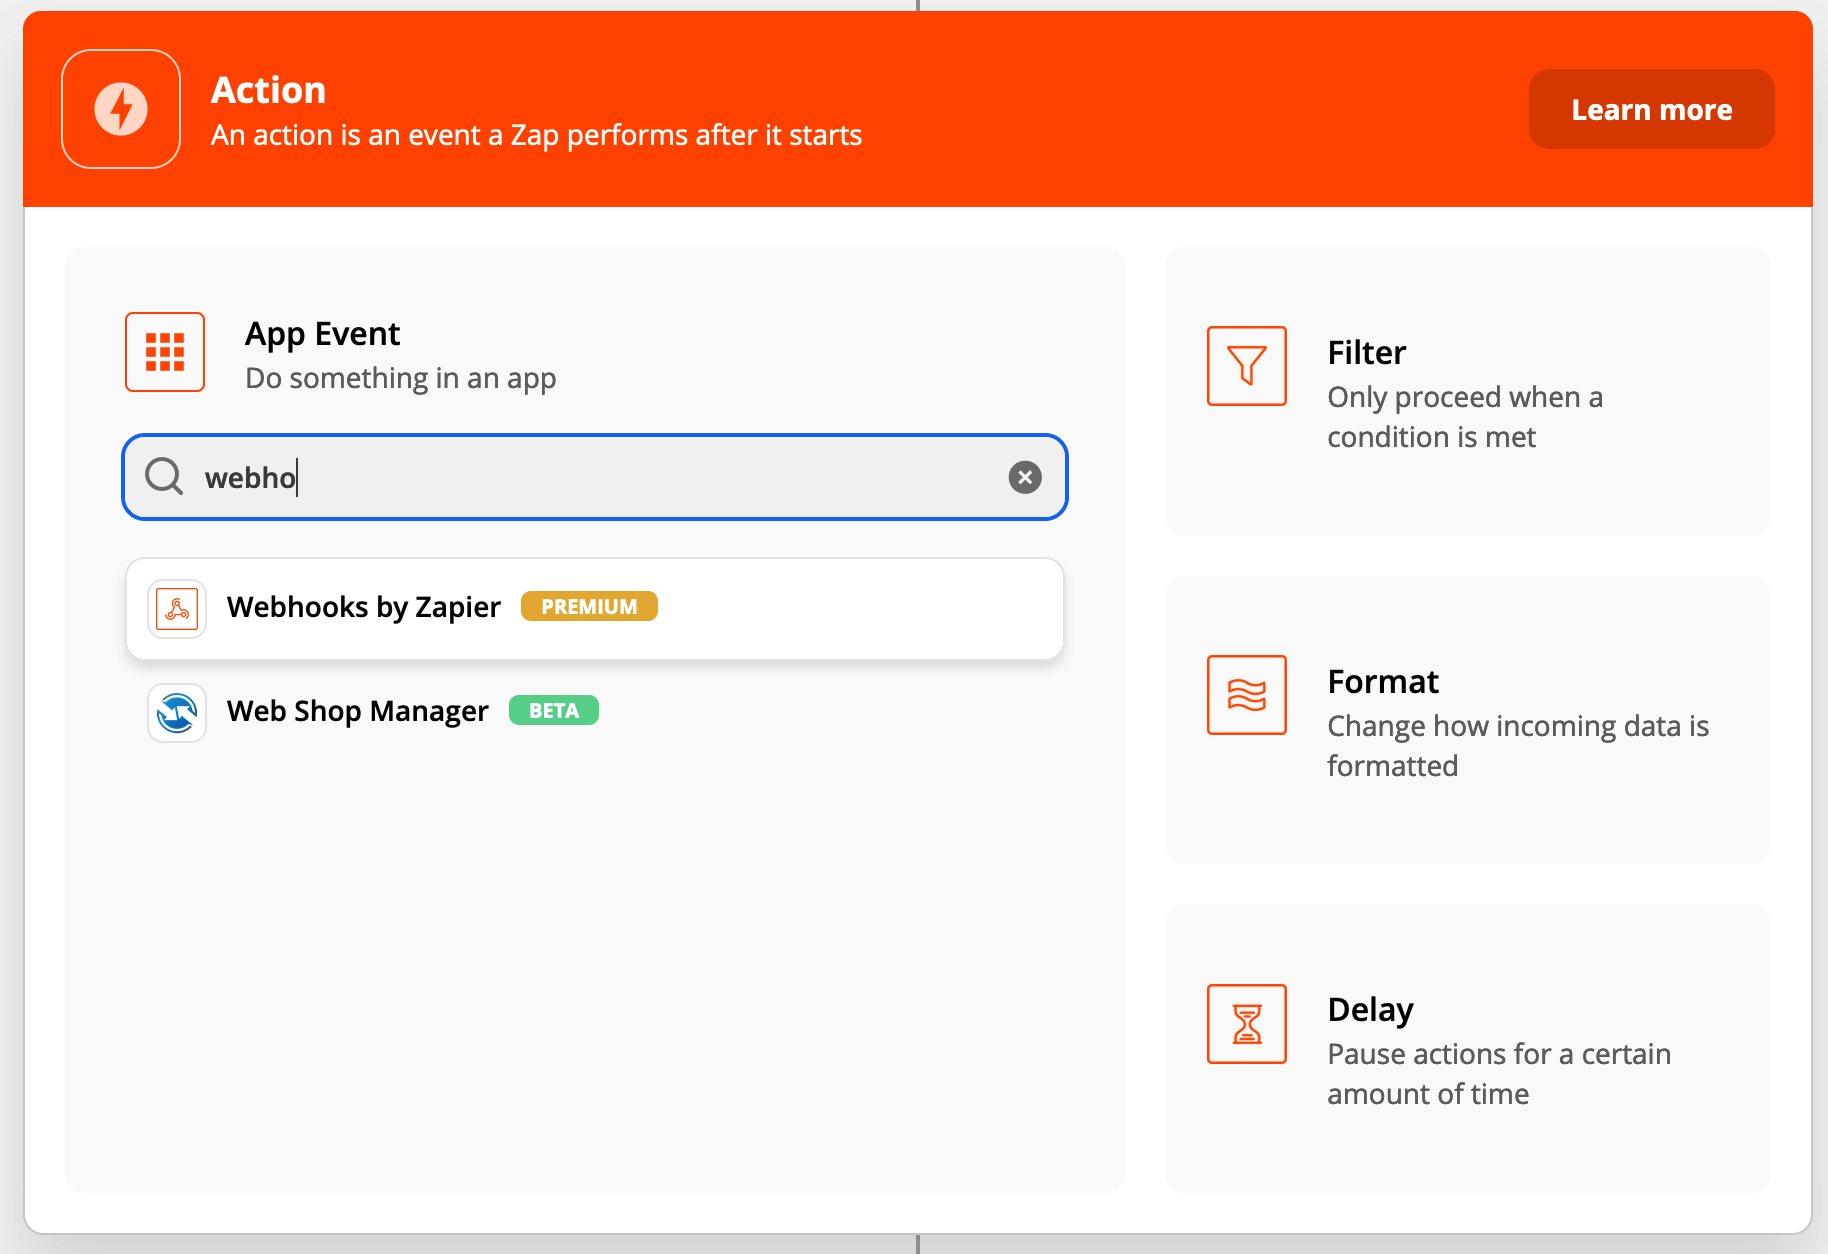 Step 1 of the advanced Zapier integration: Select Webhooks by Zapier as the App Event